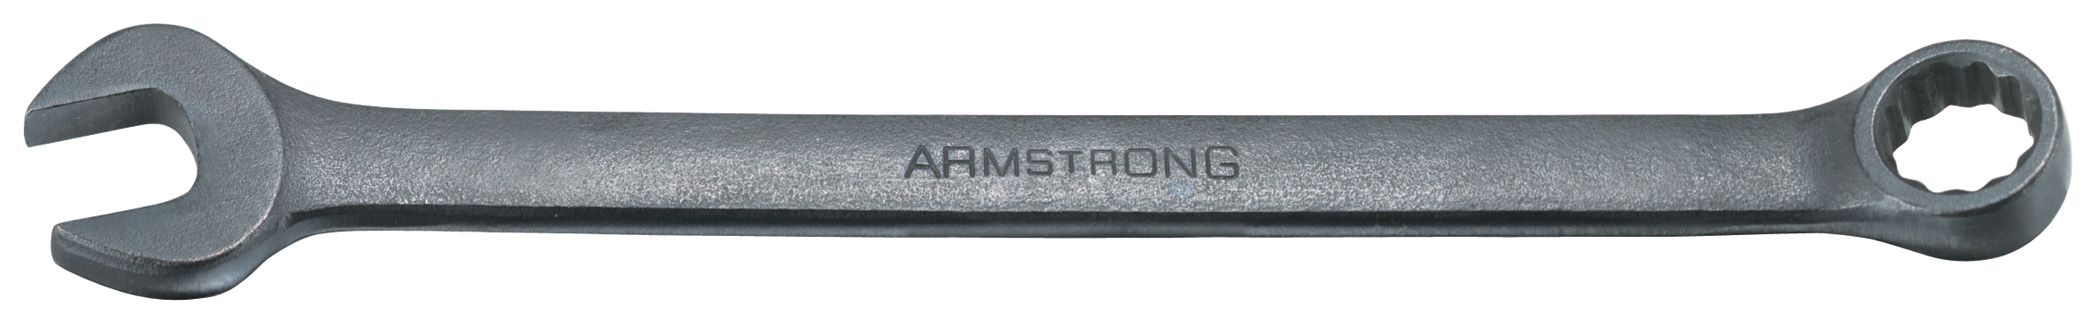 Armstrong 2-1/2 in. 12 pt. Black Oxide Long Combination Wrench